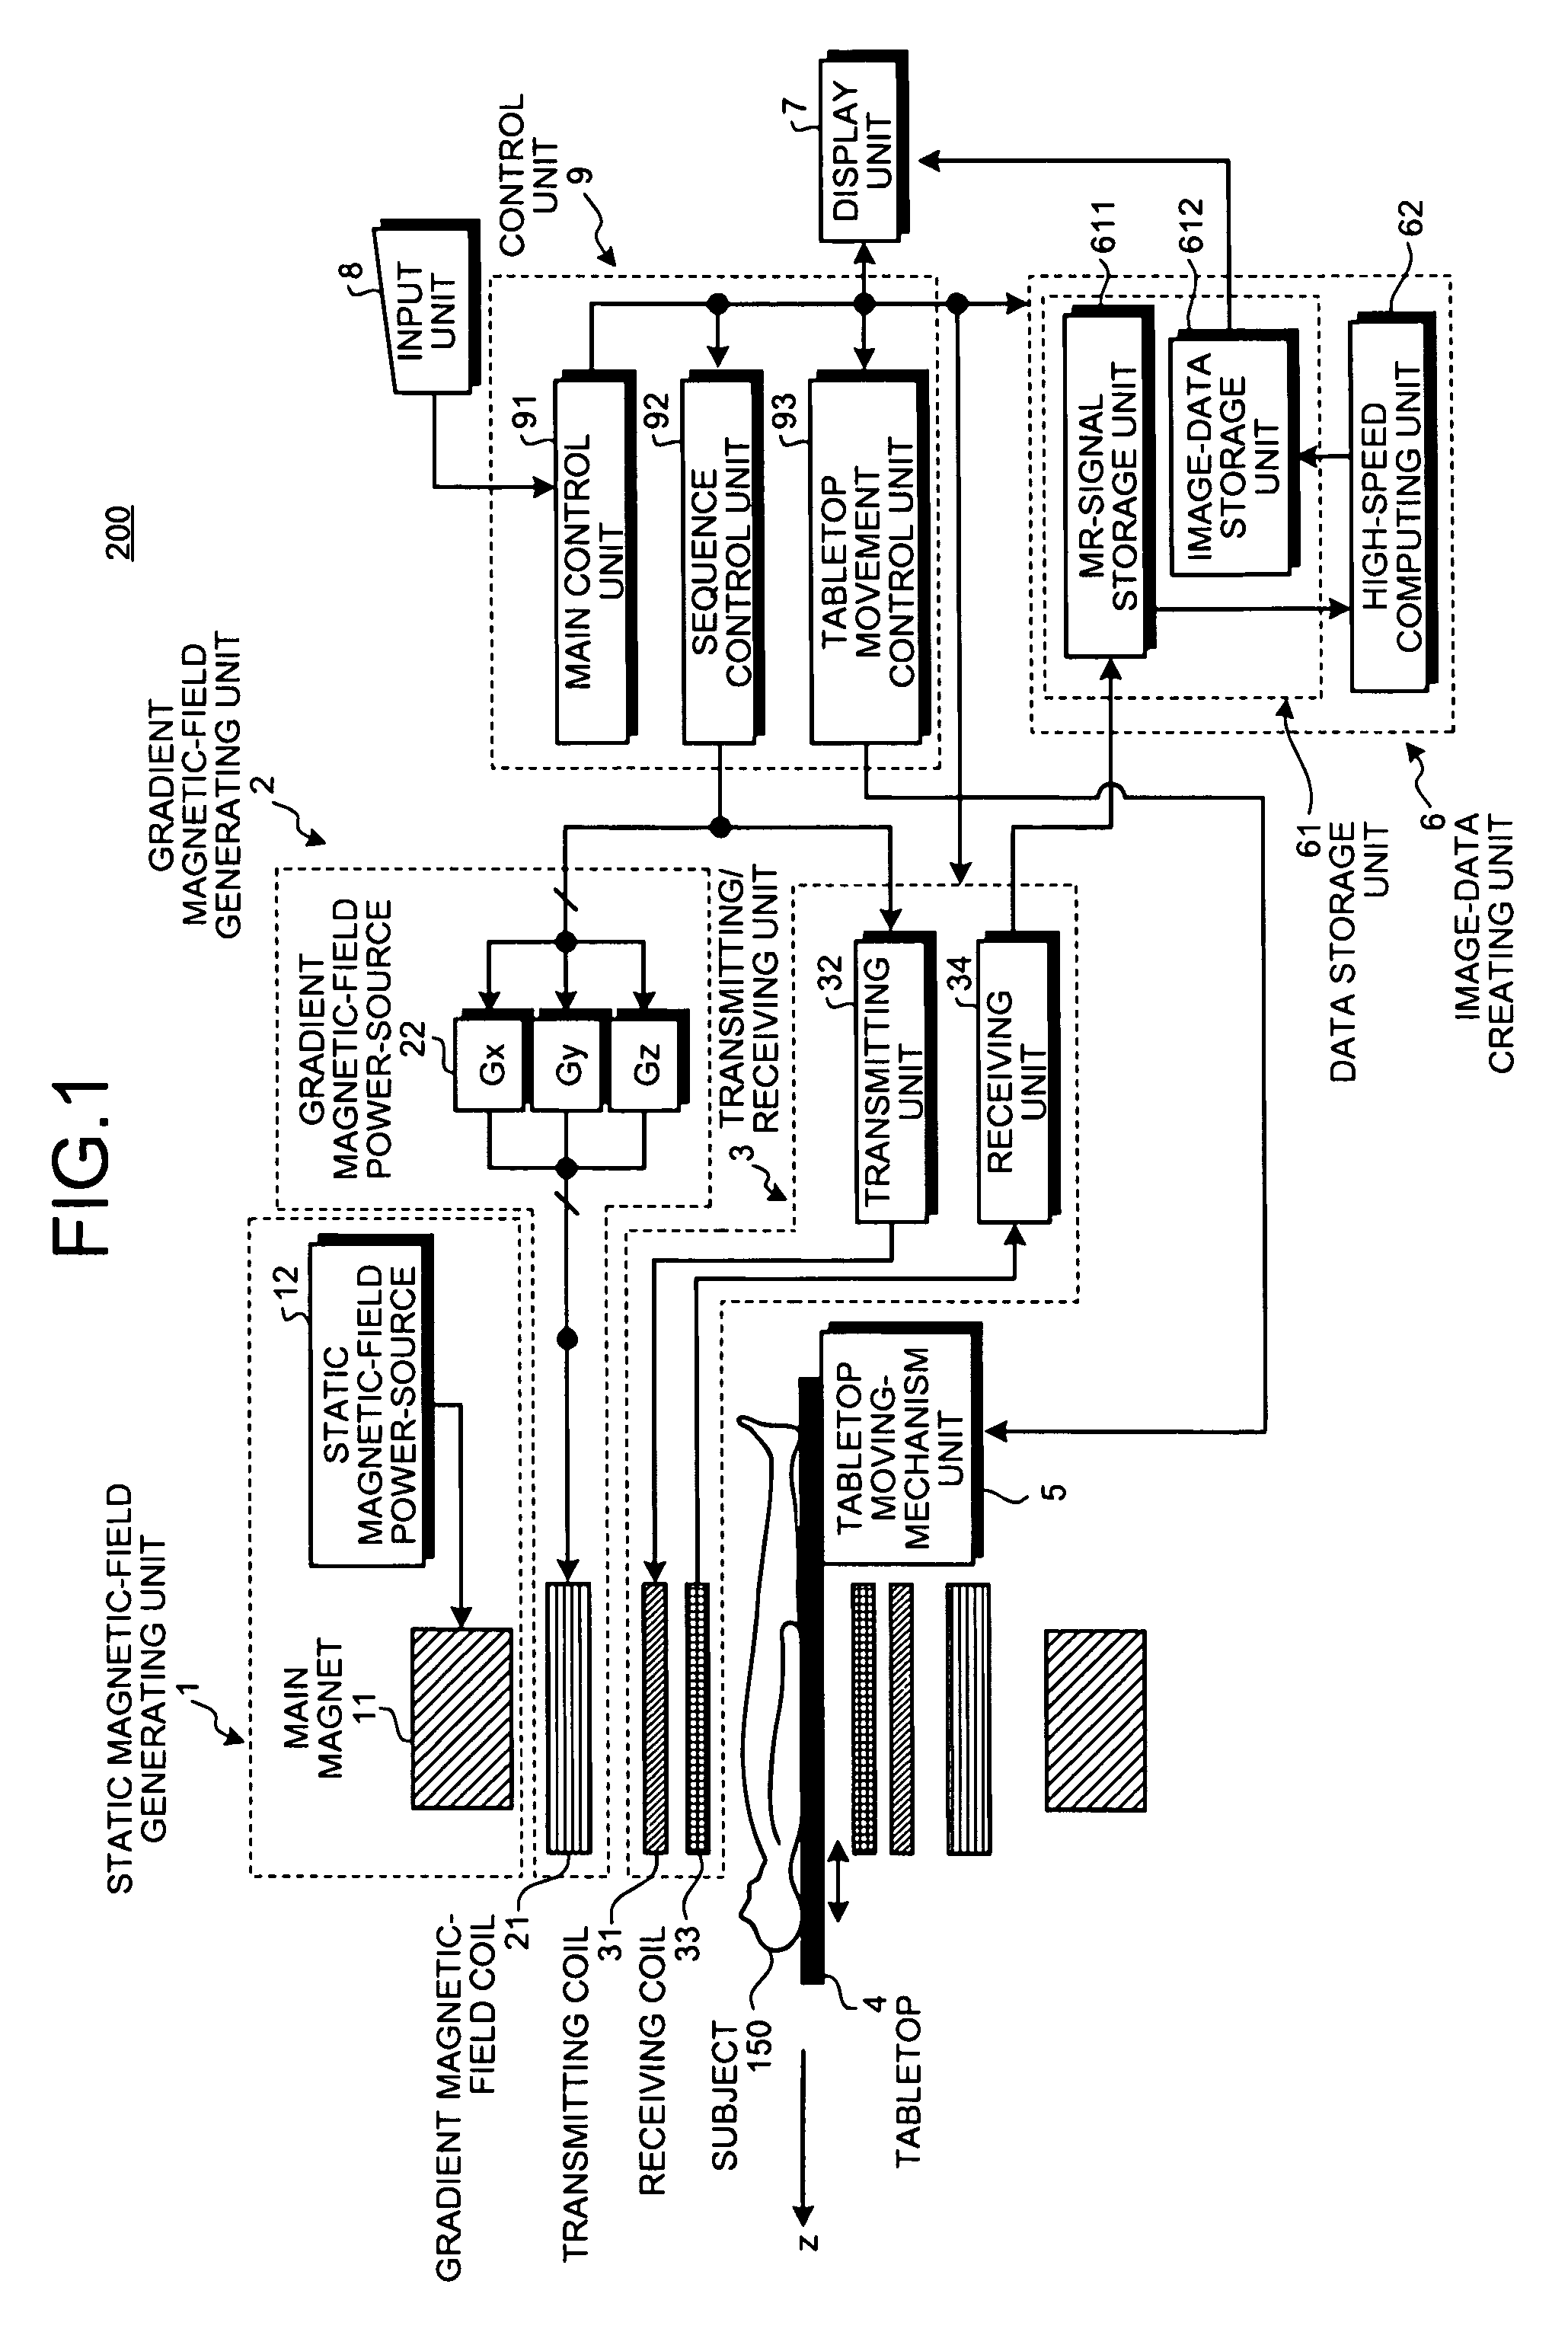 MRI apparatus and method using sample filtering based on time shifts caused by temporal variations in magnetic field strength